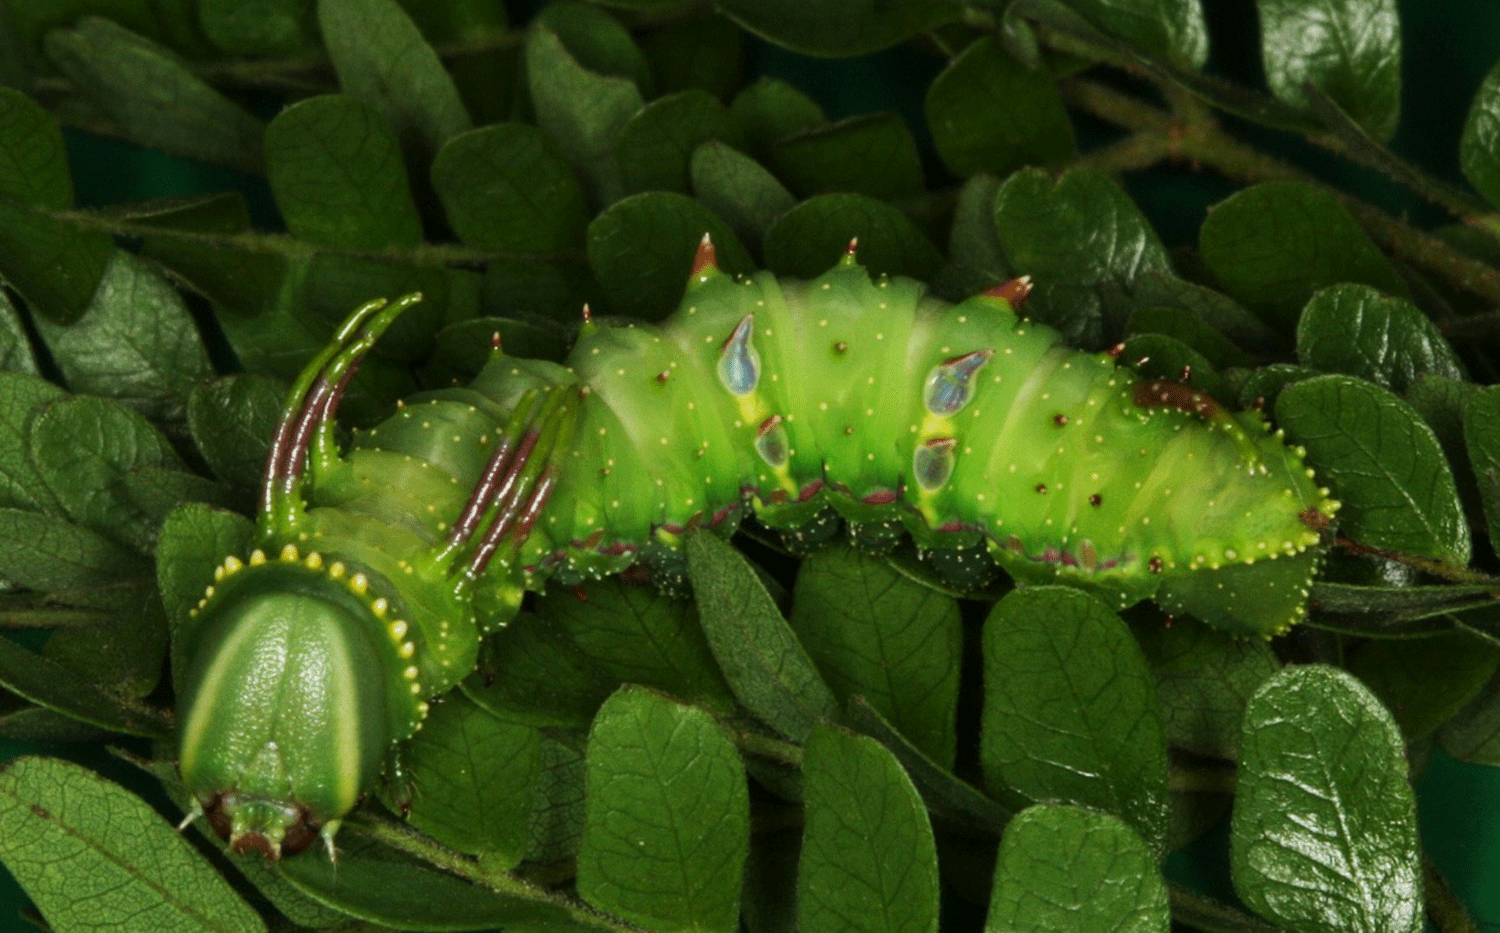 Large green caterpillar on leaves